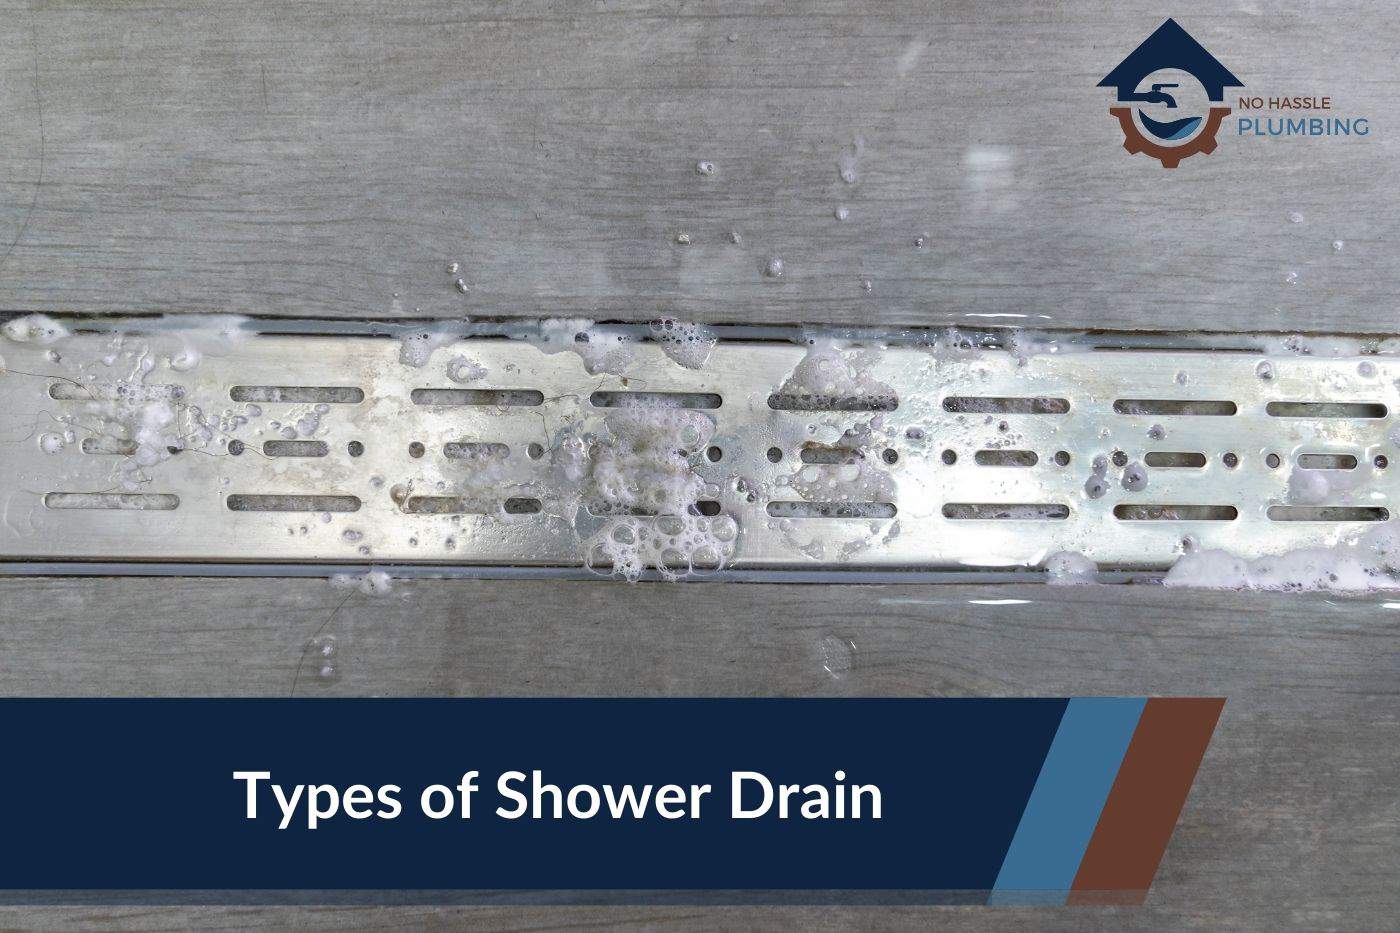 Types of Shower Drains - No Hassle Plumbing.com Featured Image of a Linear Shower Drain with soap bubbles and water lying in pools around it.